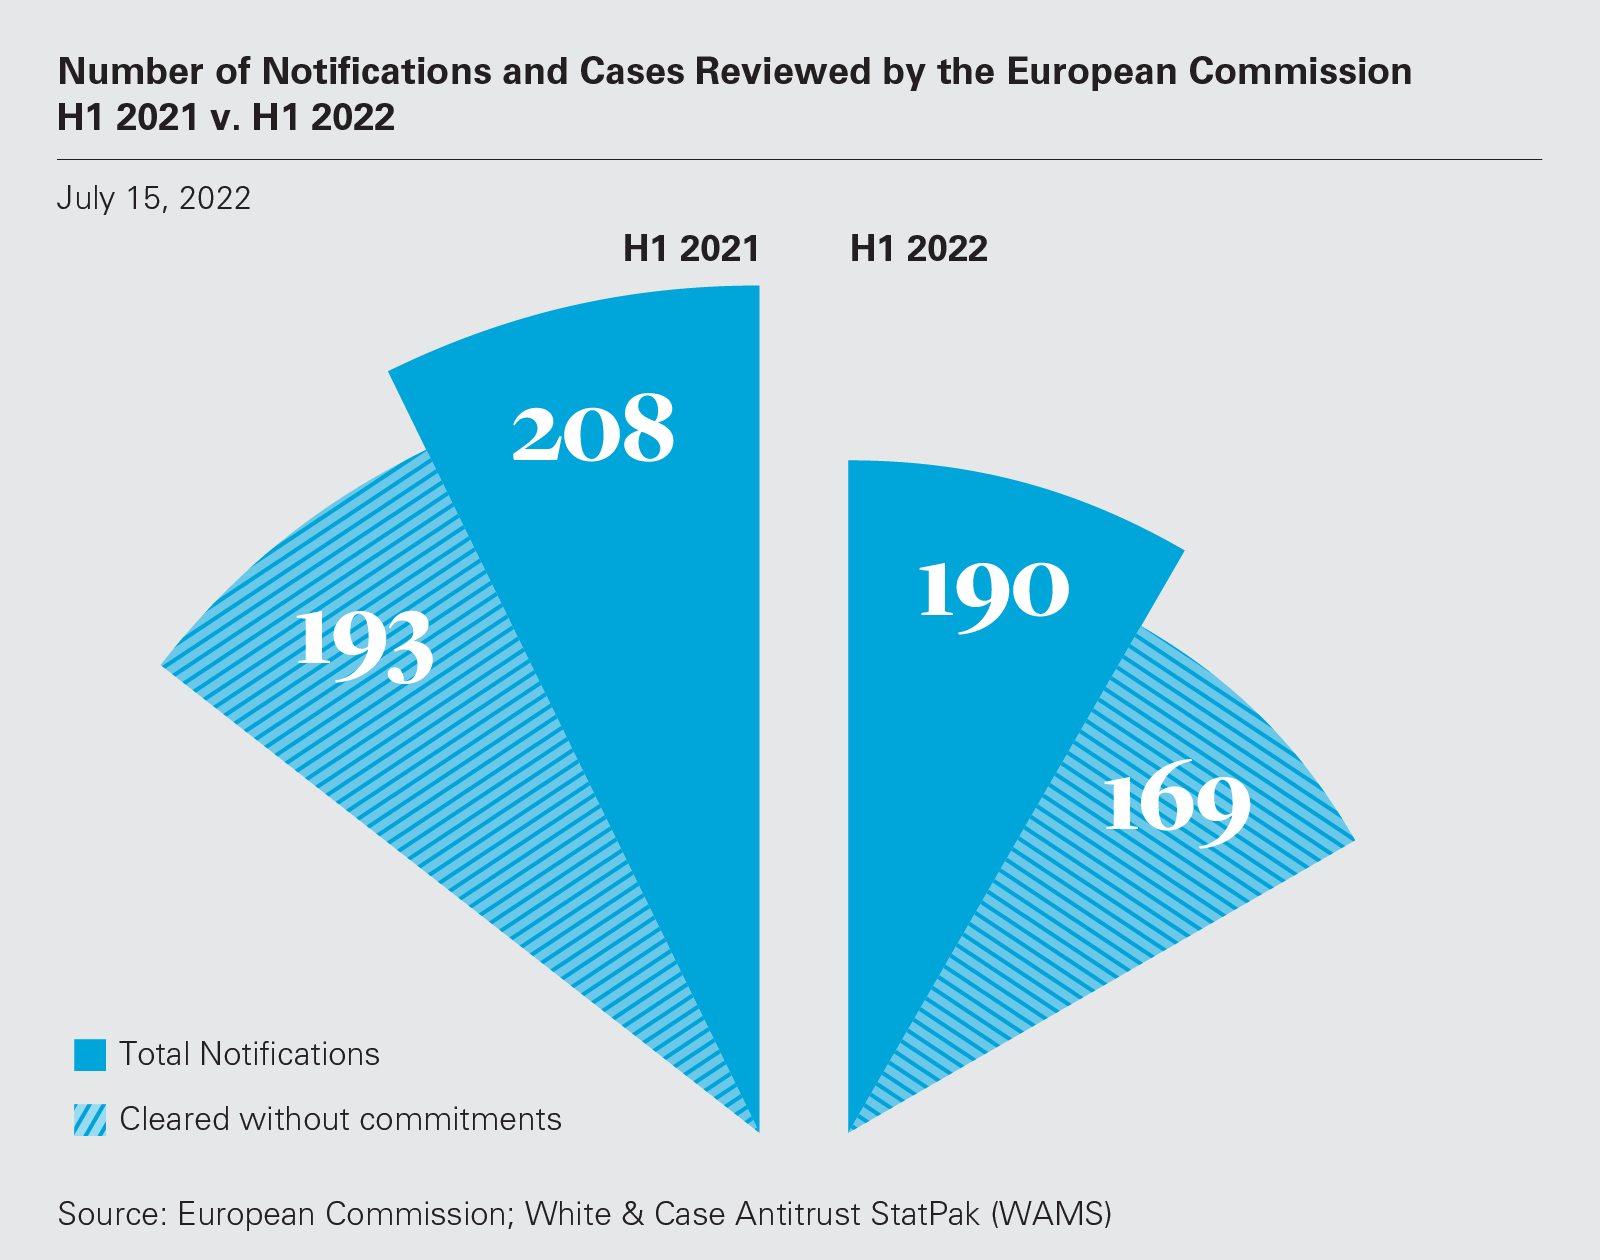 Number of Notifications and Cases Reviewed by the European Commission H1 2021 v. H1 2022